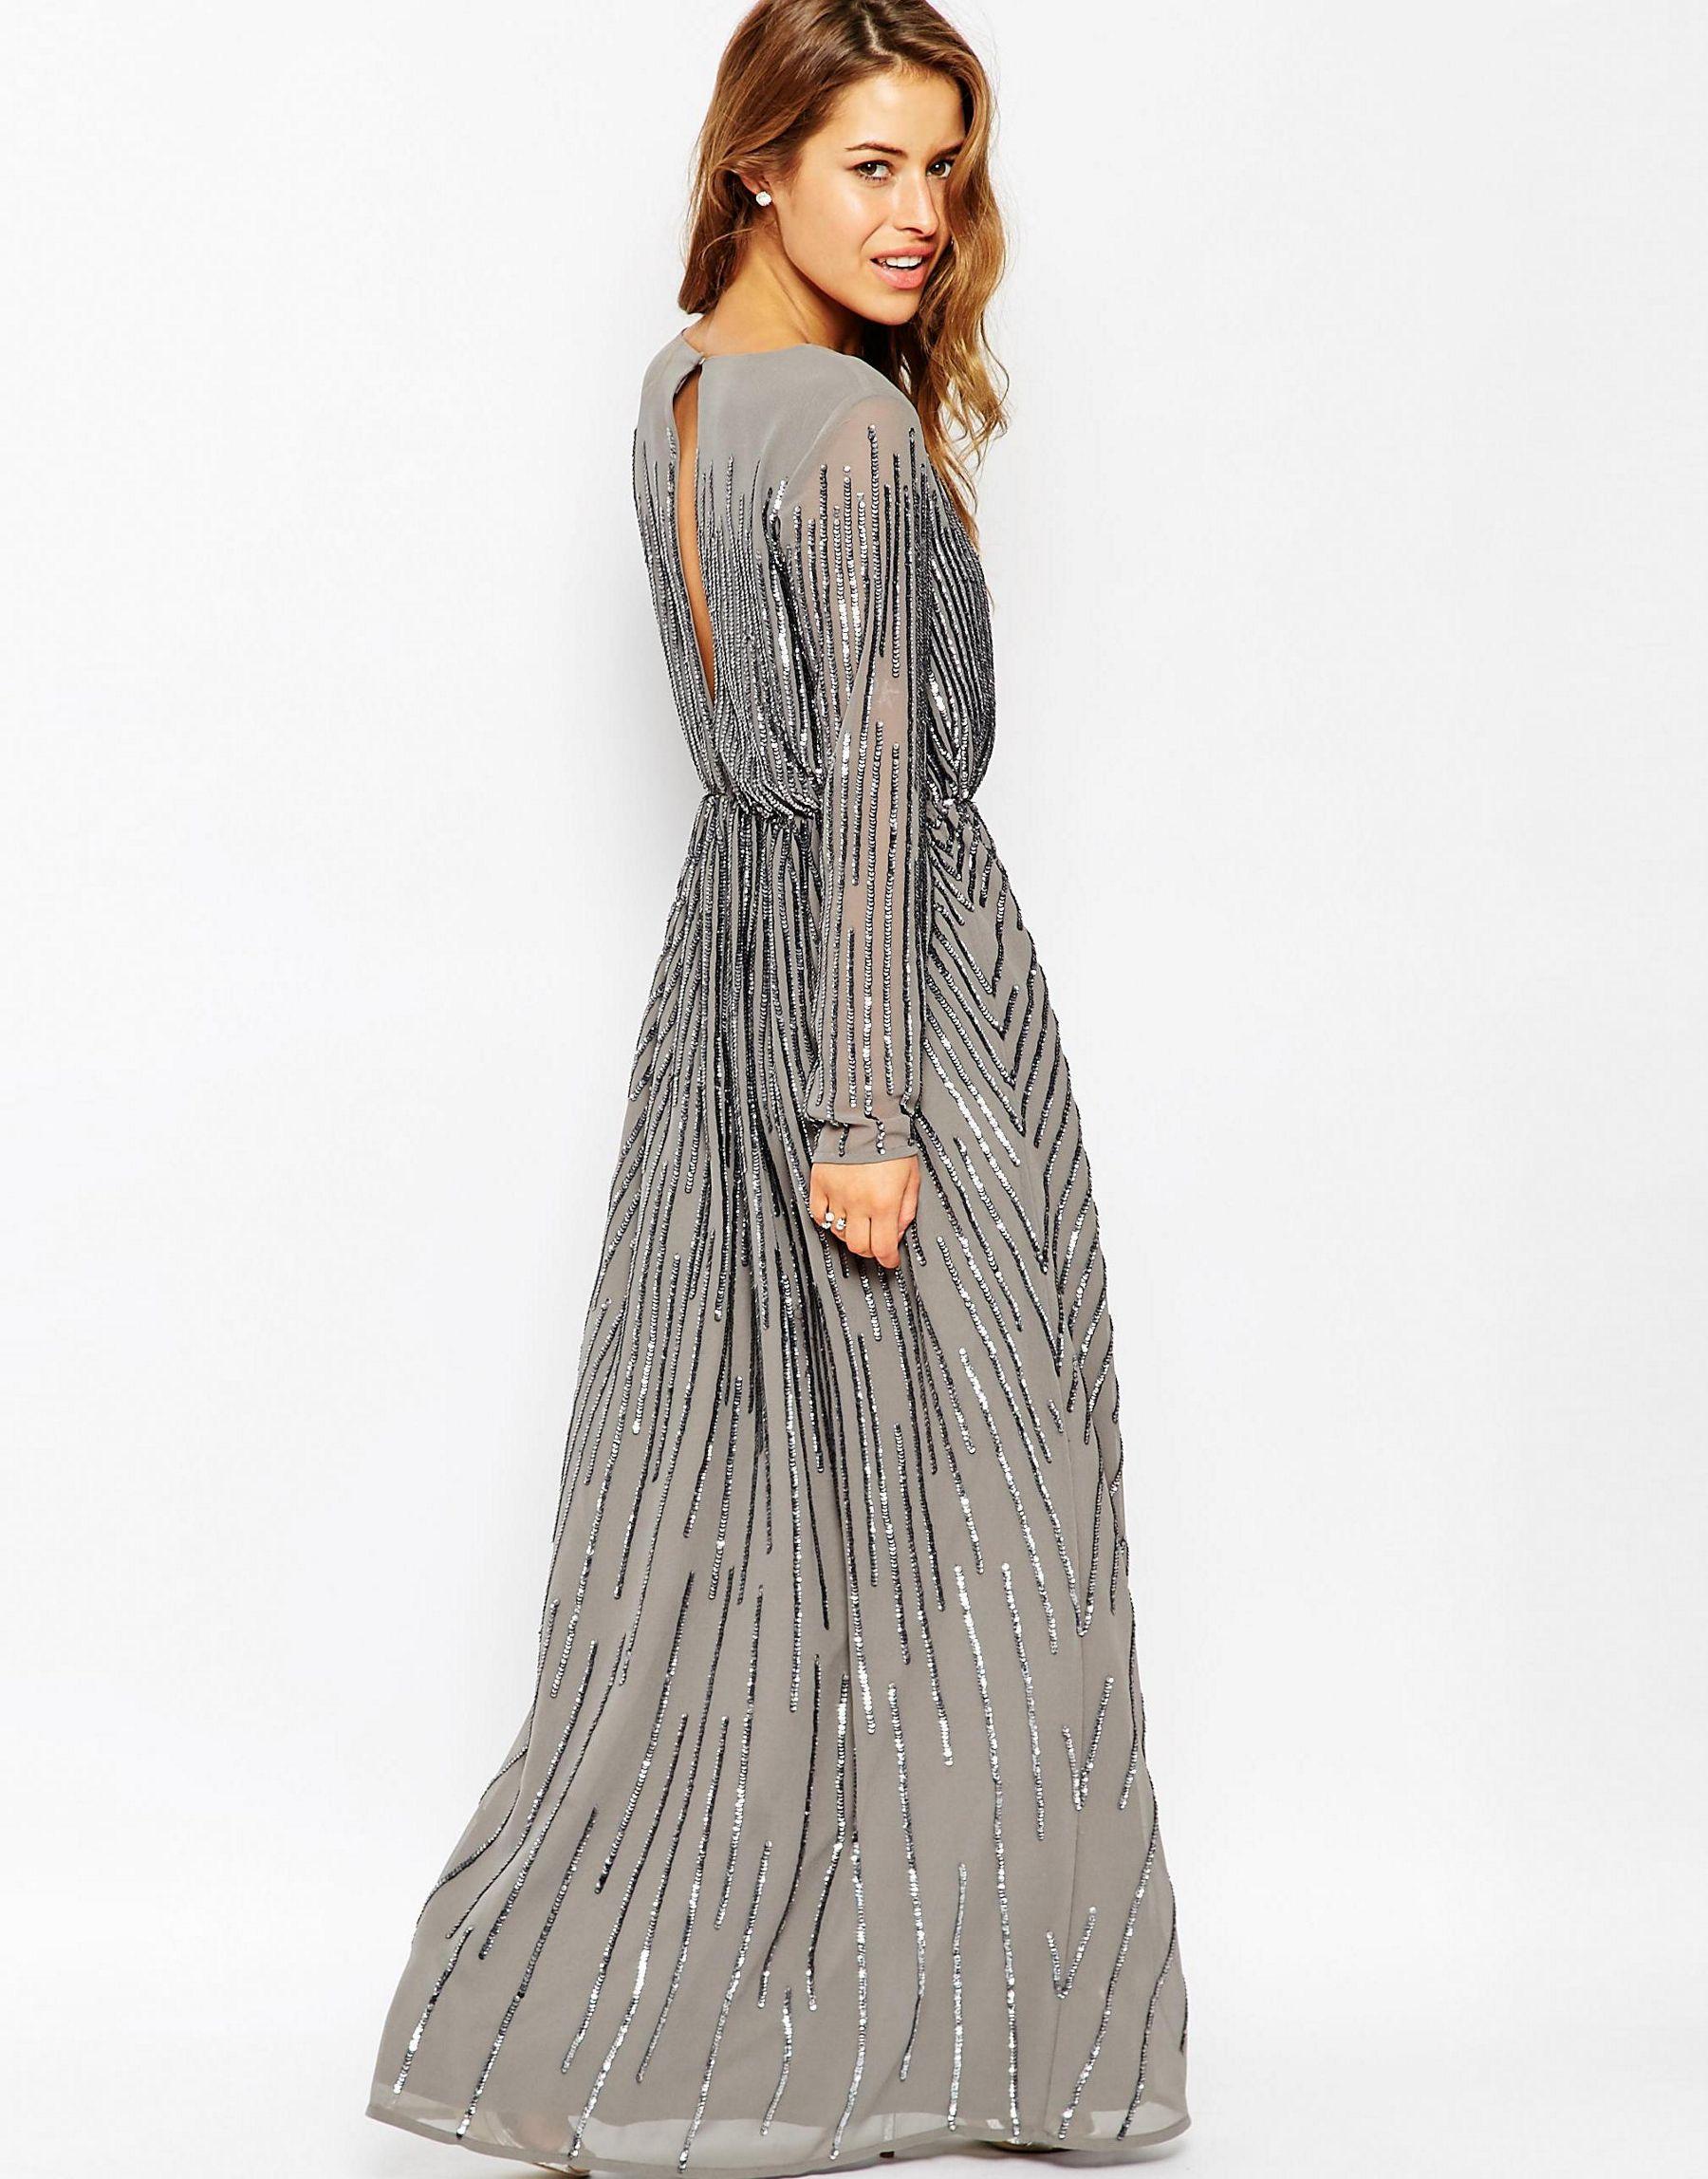 ASOS Synthetic Petite Linear Sequin Long Sleeve Maxi Dress in Gray - Lyst